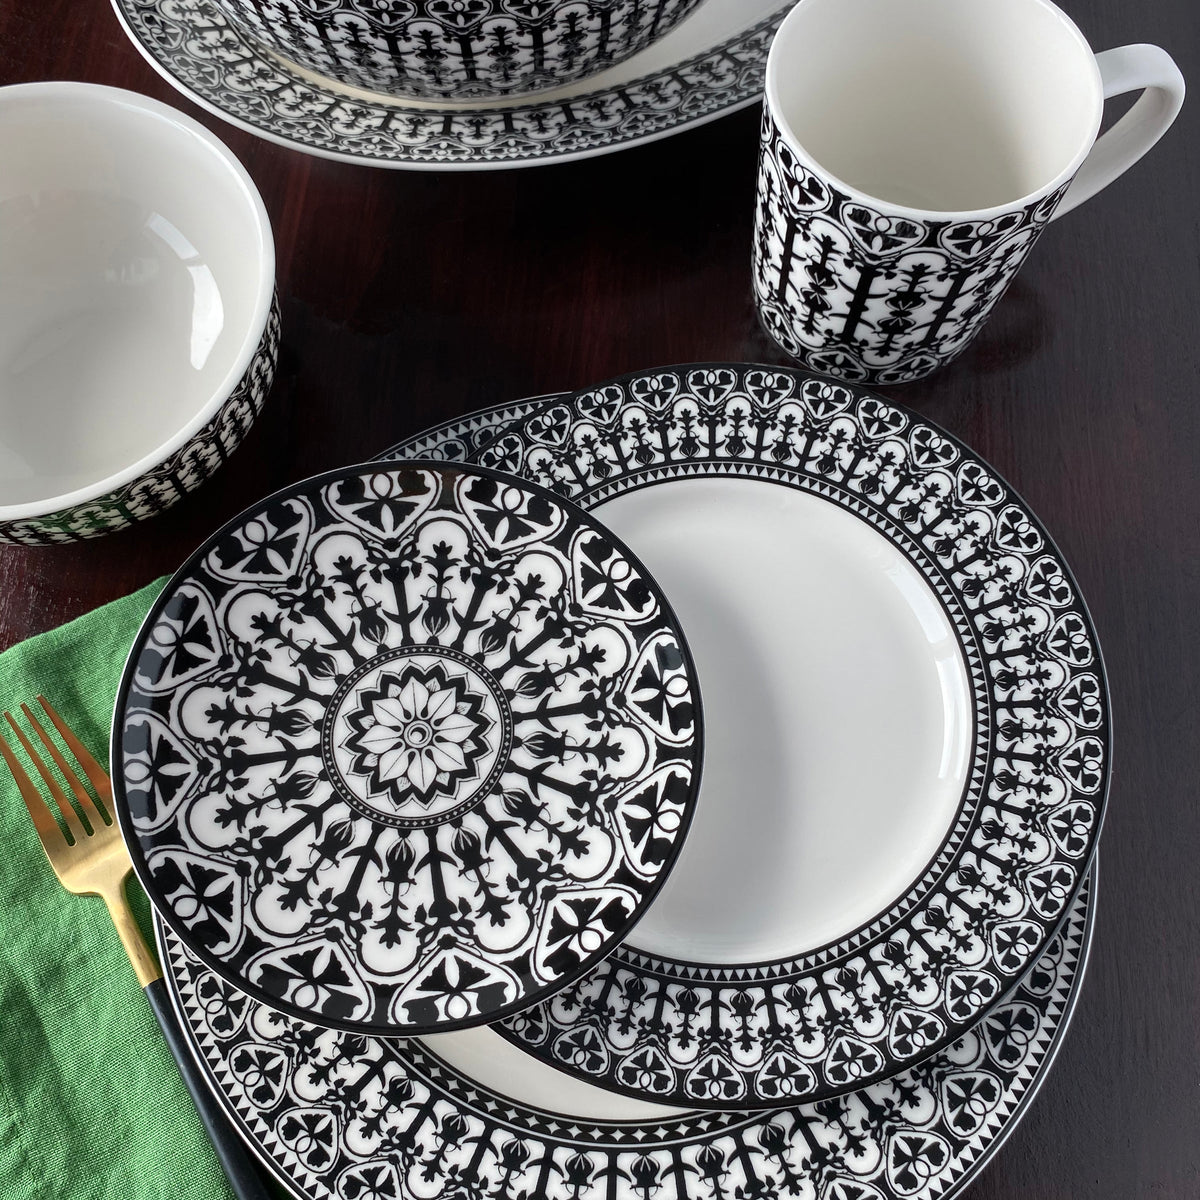 The Casablanca Canapé Plates from the Caskata Artisanal Home Geometrics Collection brings a touch of elegance to any table. With its sleek black and white design, this dinnerware set will certainly make a statement.